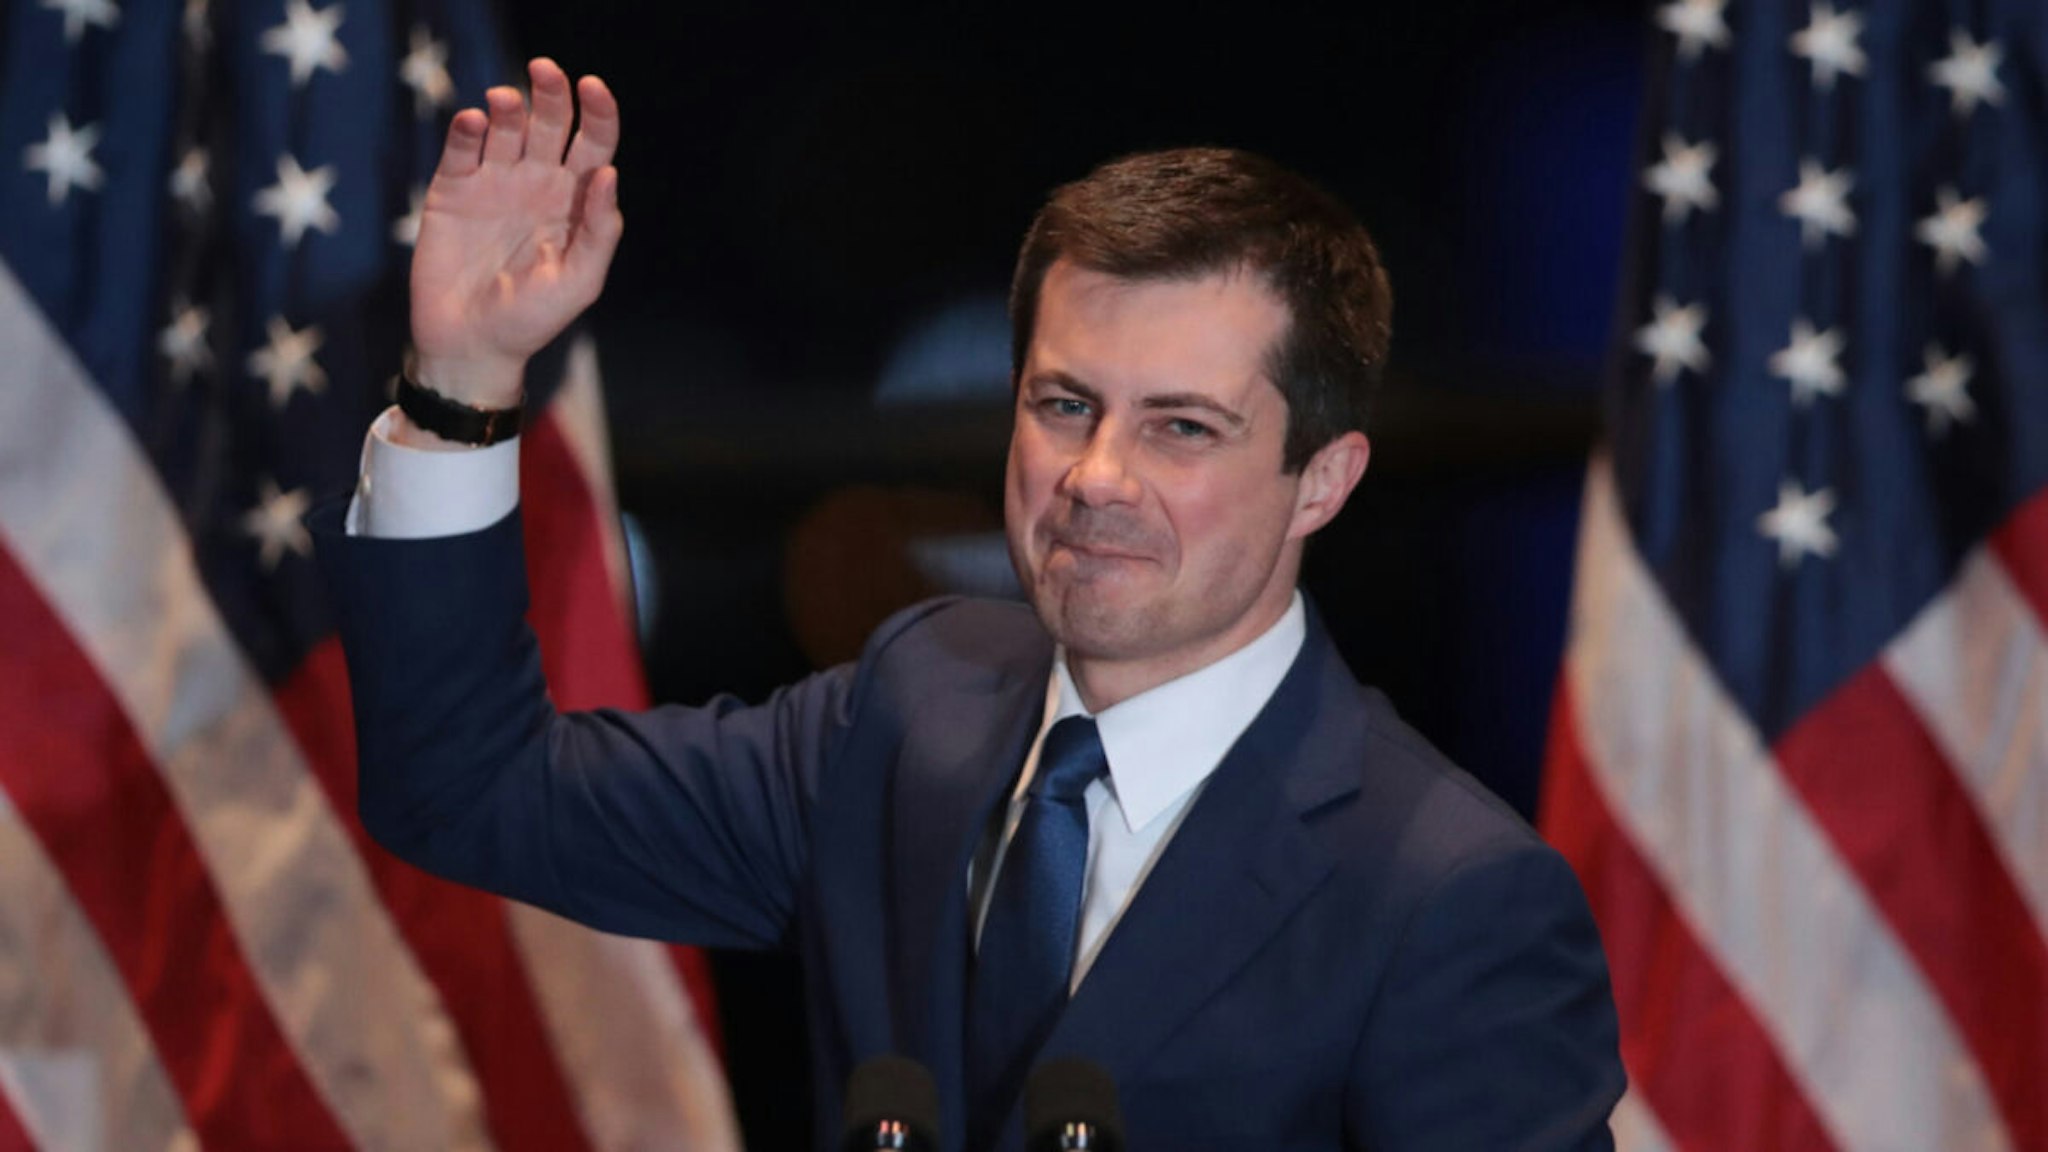 Former South Bend, Indiana Mayor Pete Buttigieg announces he is ending his campaign to be the Democratic nominee for president during a speech at the Century Center on March 01, 2020 in South Bend, Indiana.